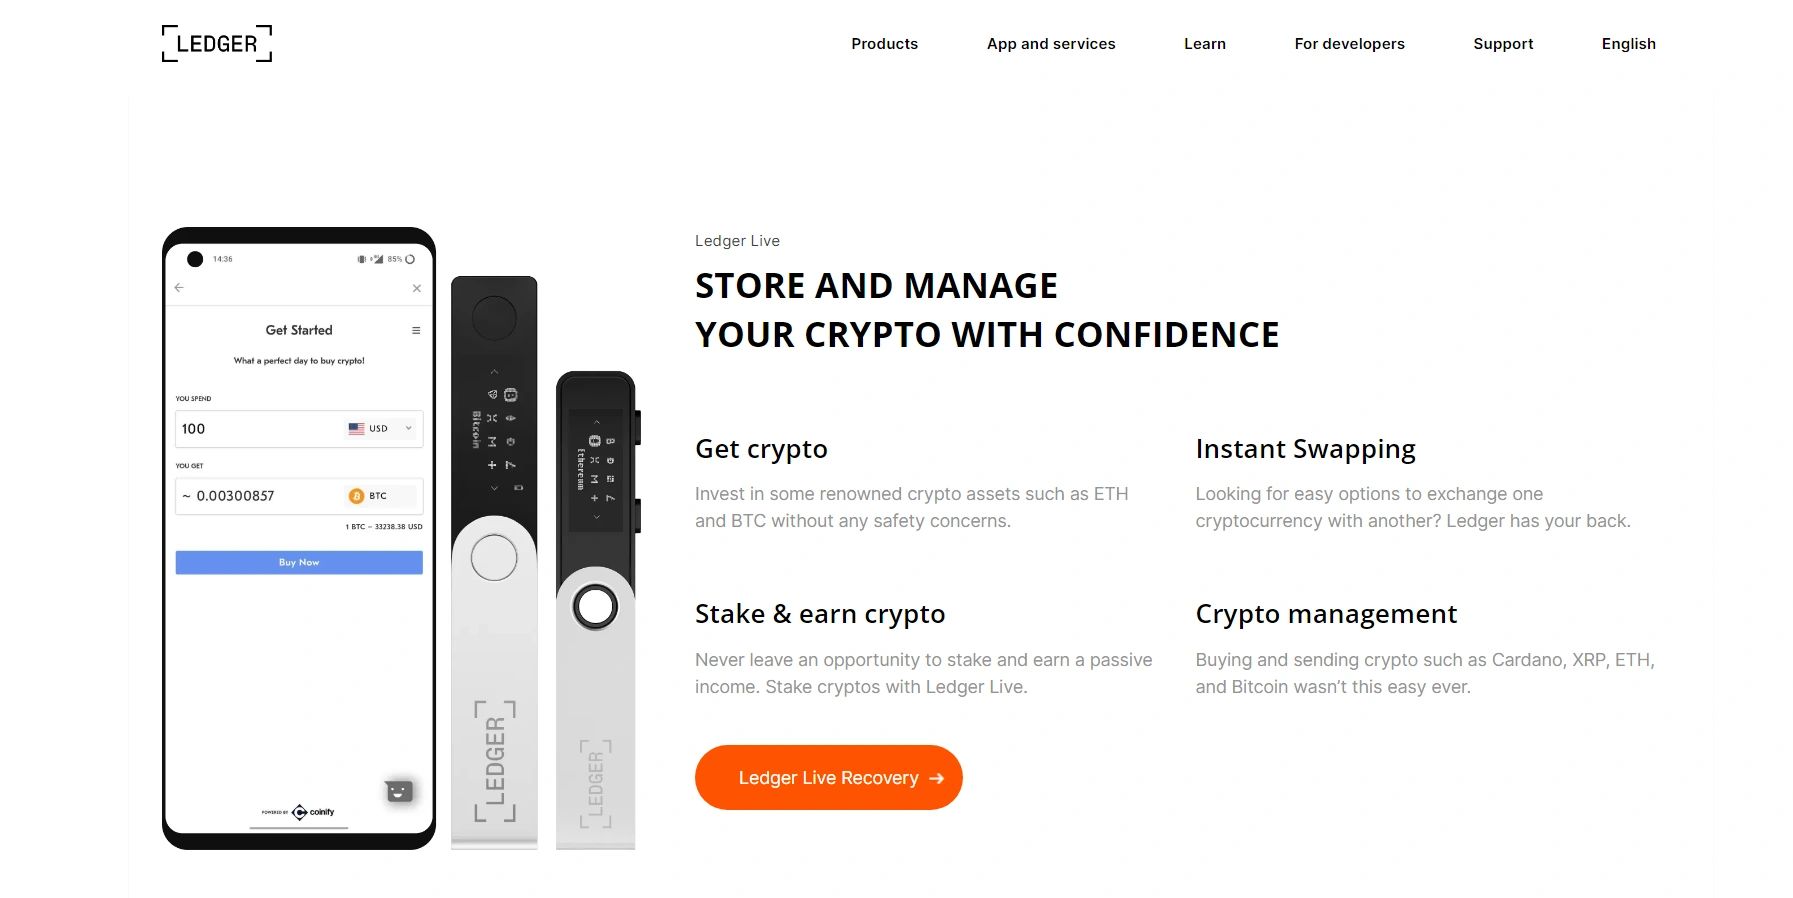 Trezor Suite is a comprehensive software platform developed for managing cryptocurrency assets. With